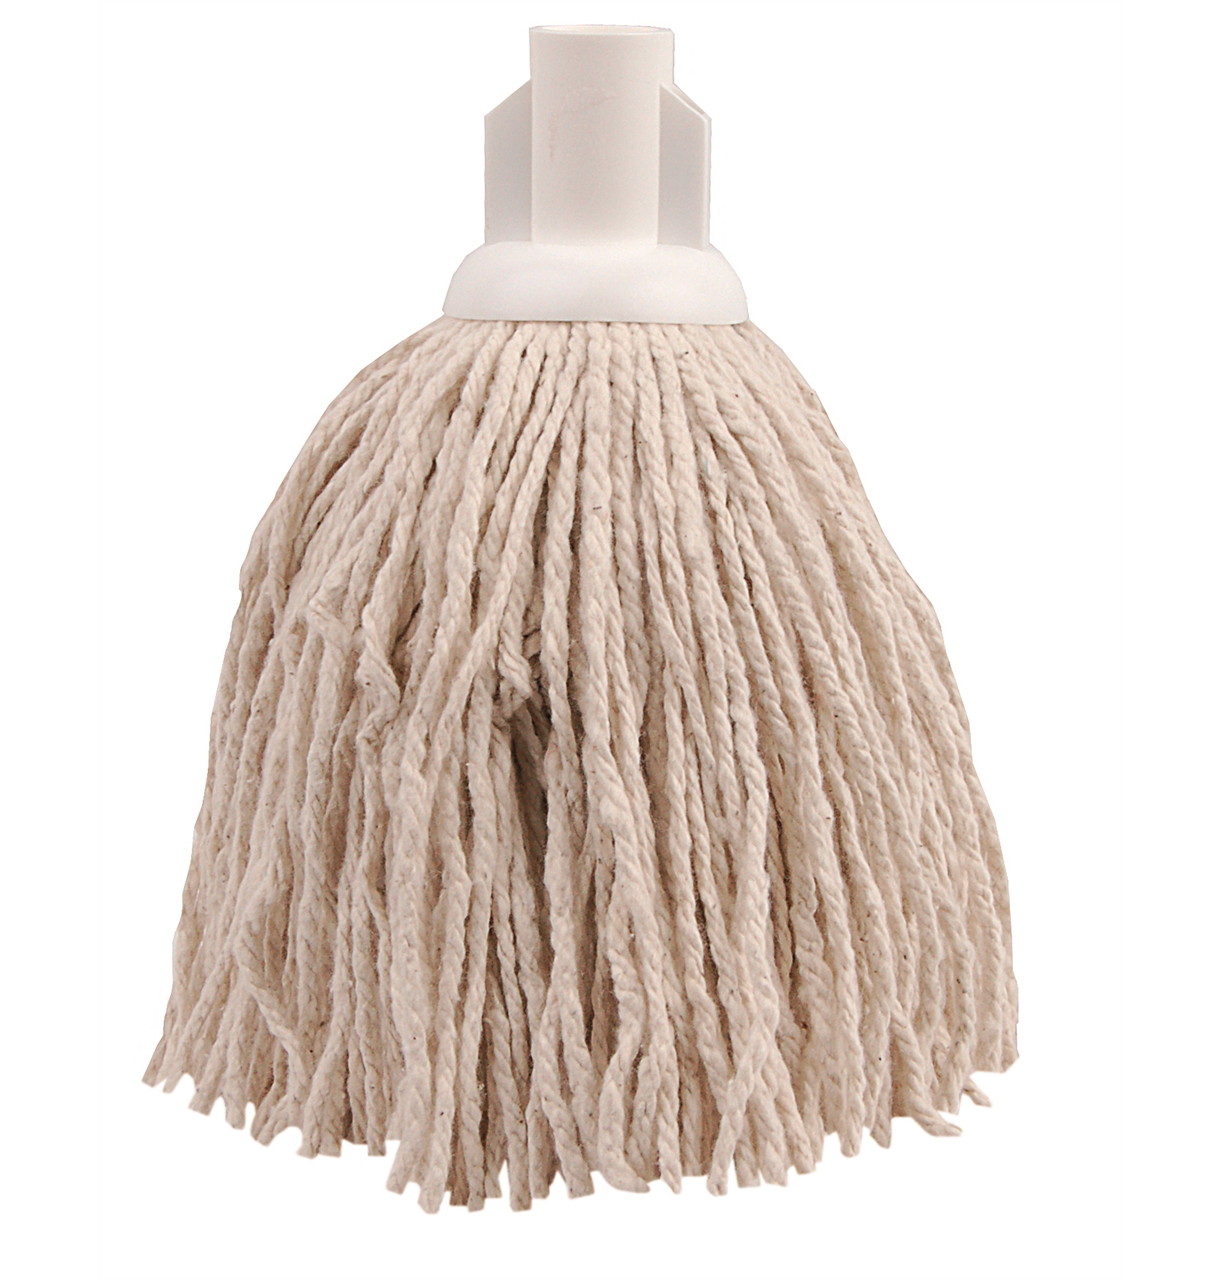 16oz Twine White Socket Mop (pack of 10)